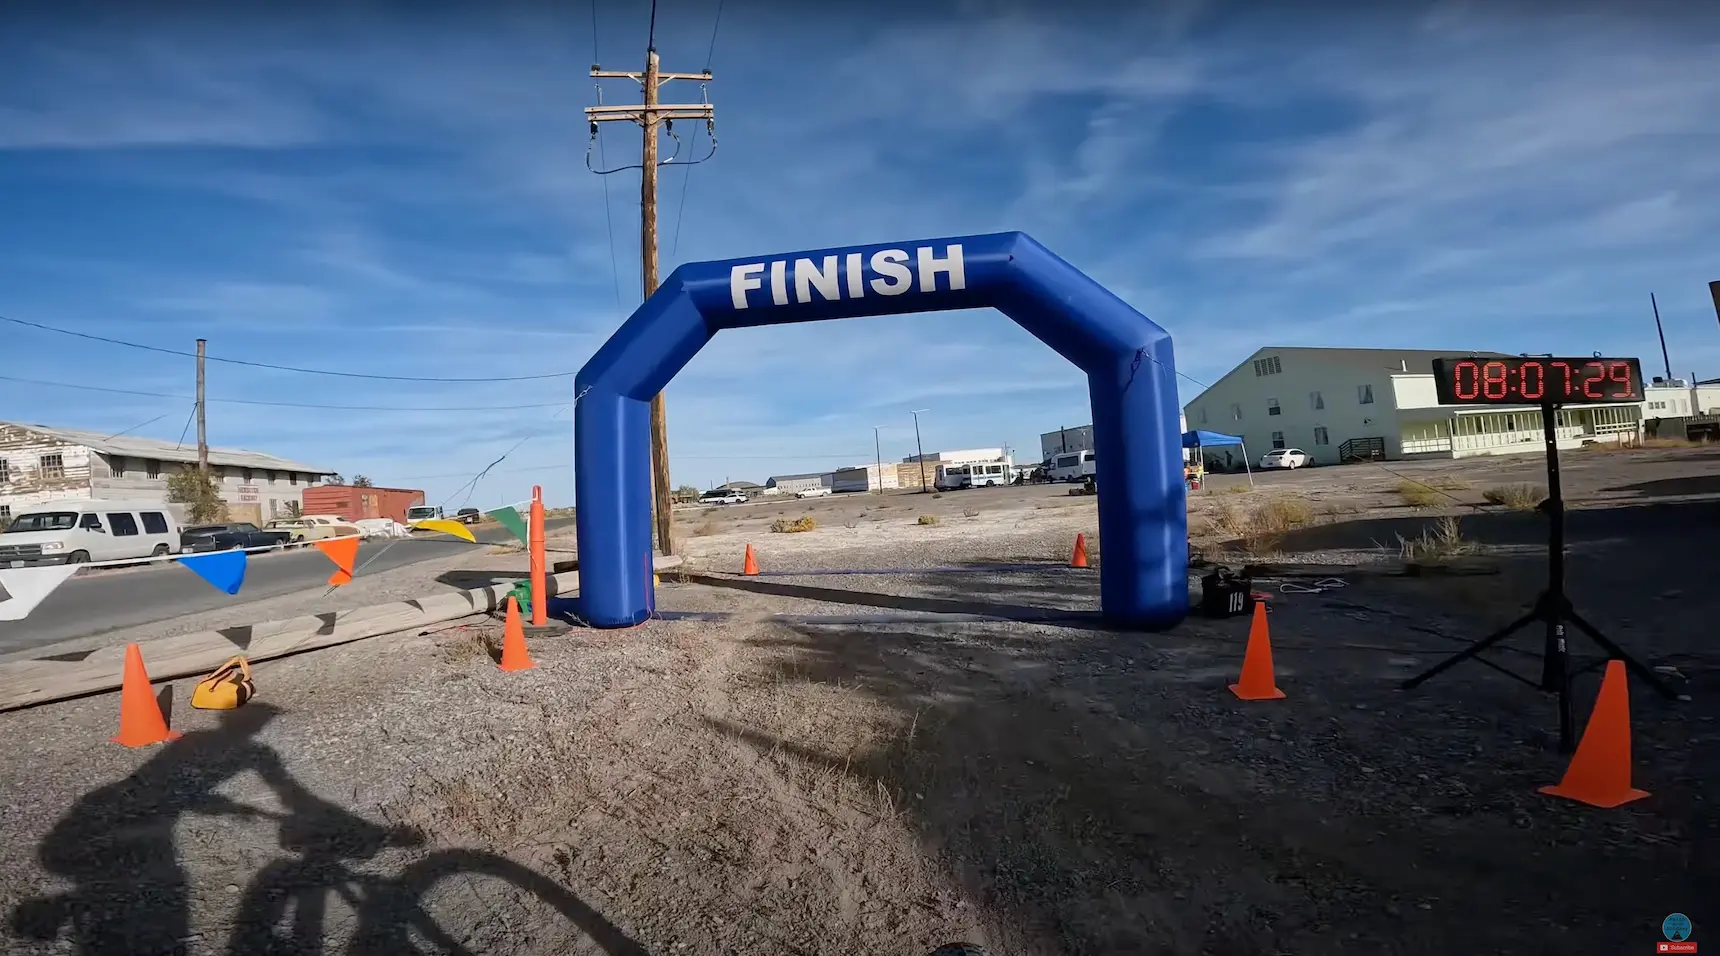 Keith is about to cross the finish line at the Salty Lizard 100 gravel race in Wendover, NV